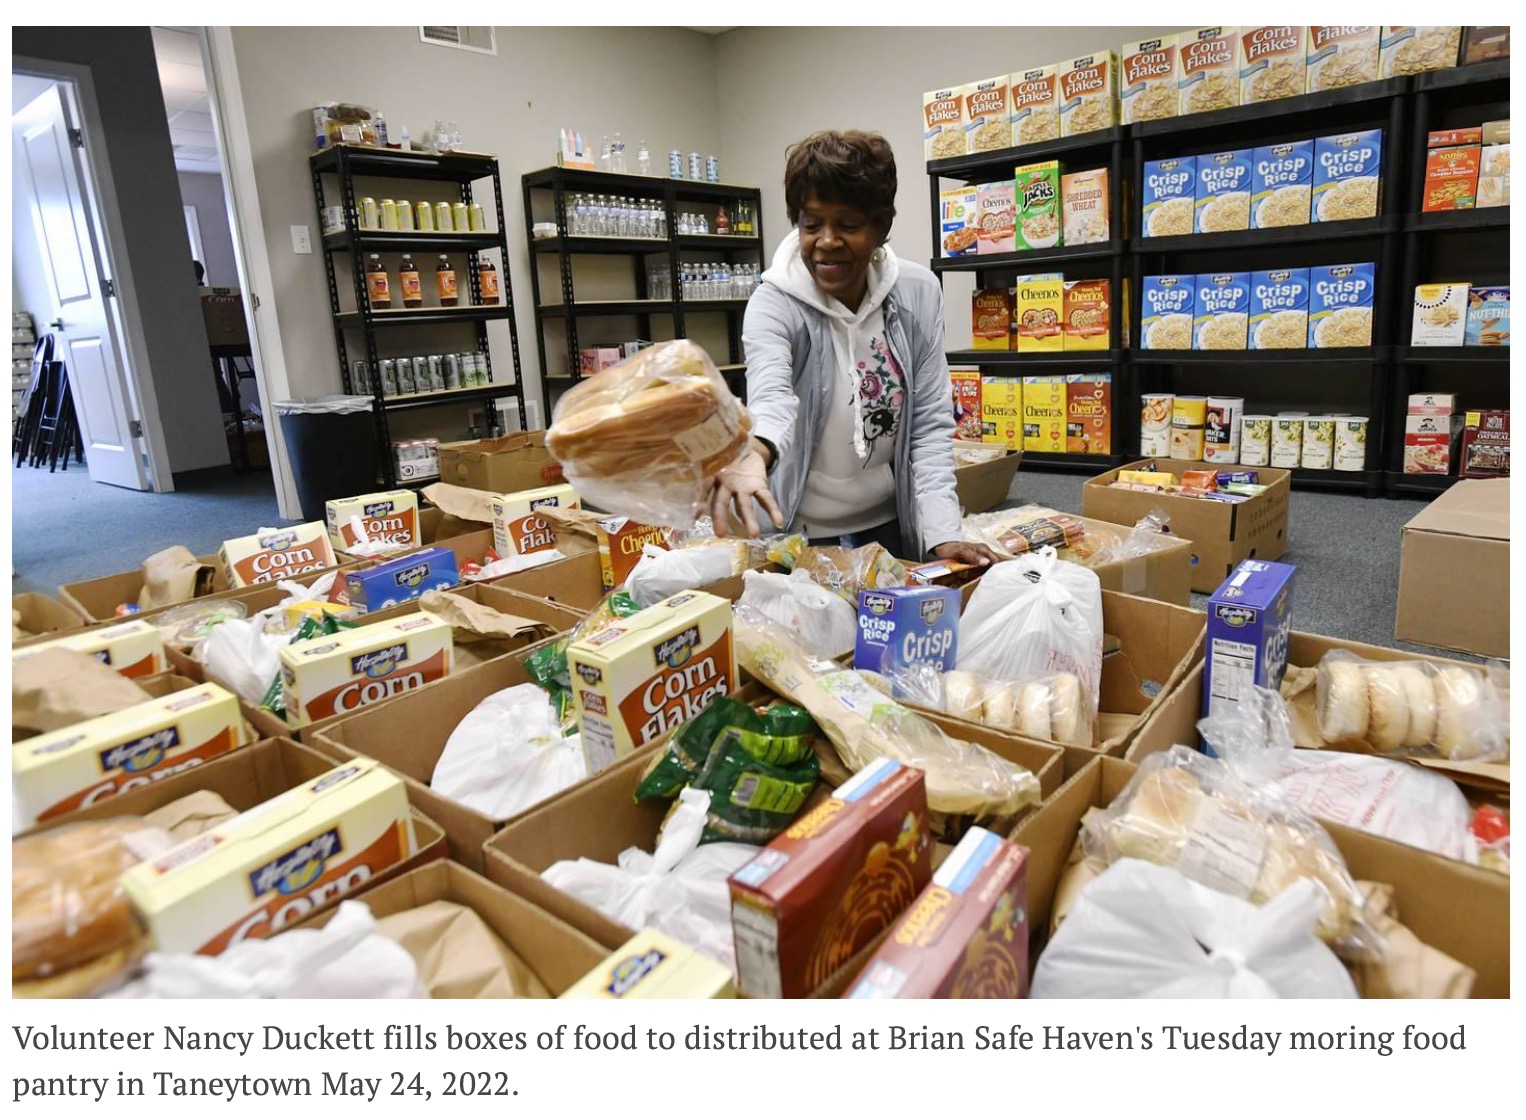 At Taneytown food pantry, volunteers are all about giving back - Westminster Rescue Mission #1